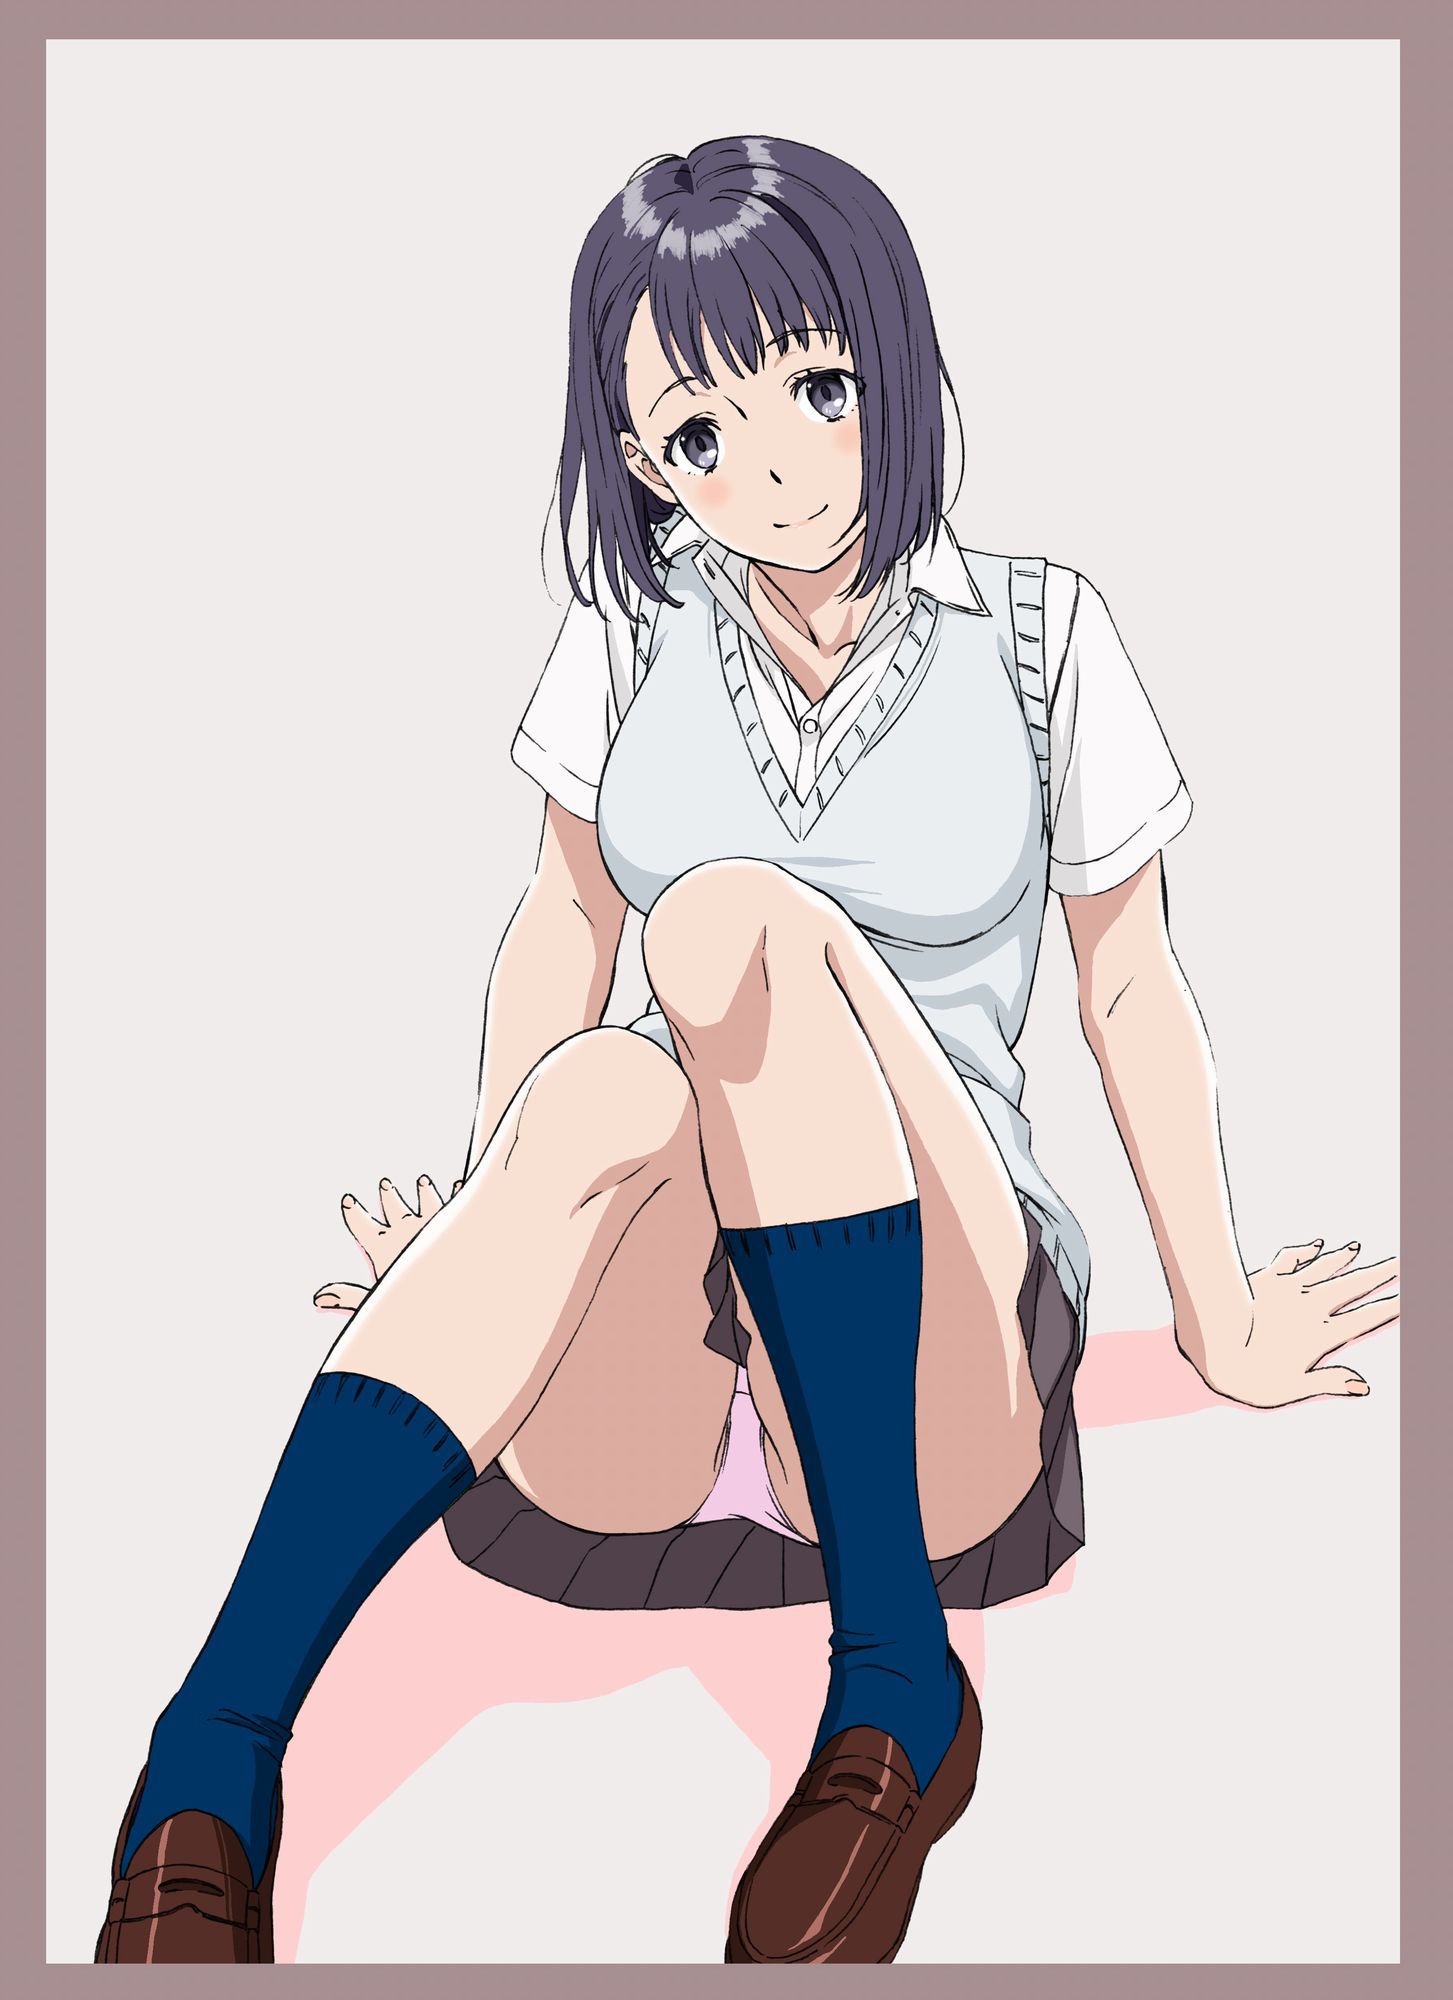 [Secondary, ZIP] second image of the underwear girl that makes glancing pants 26